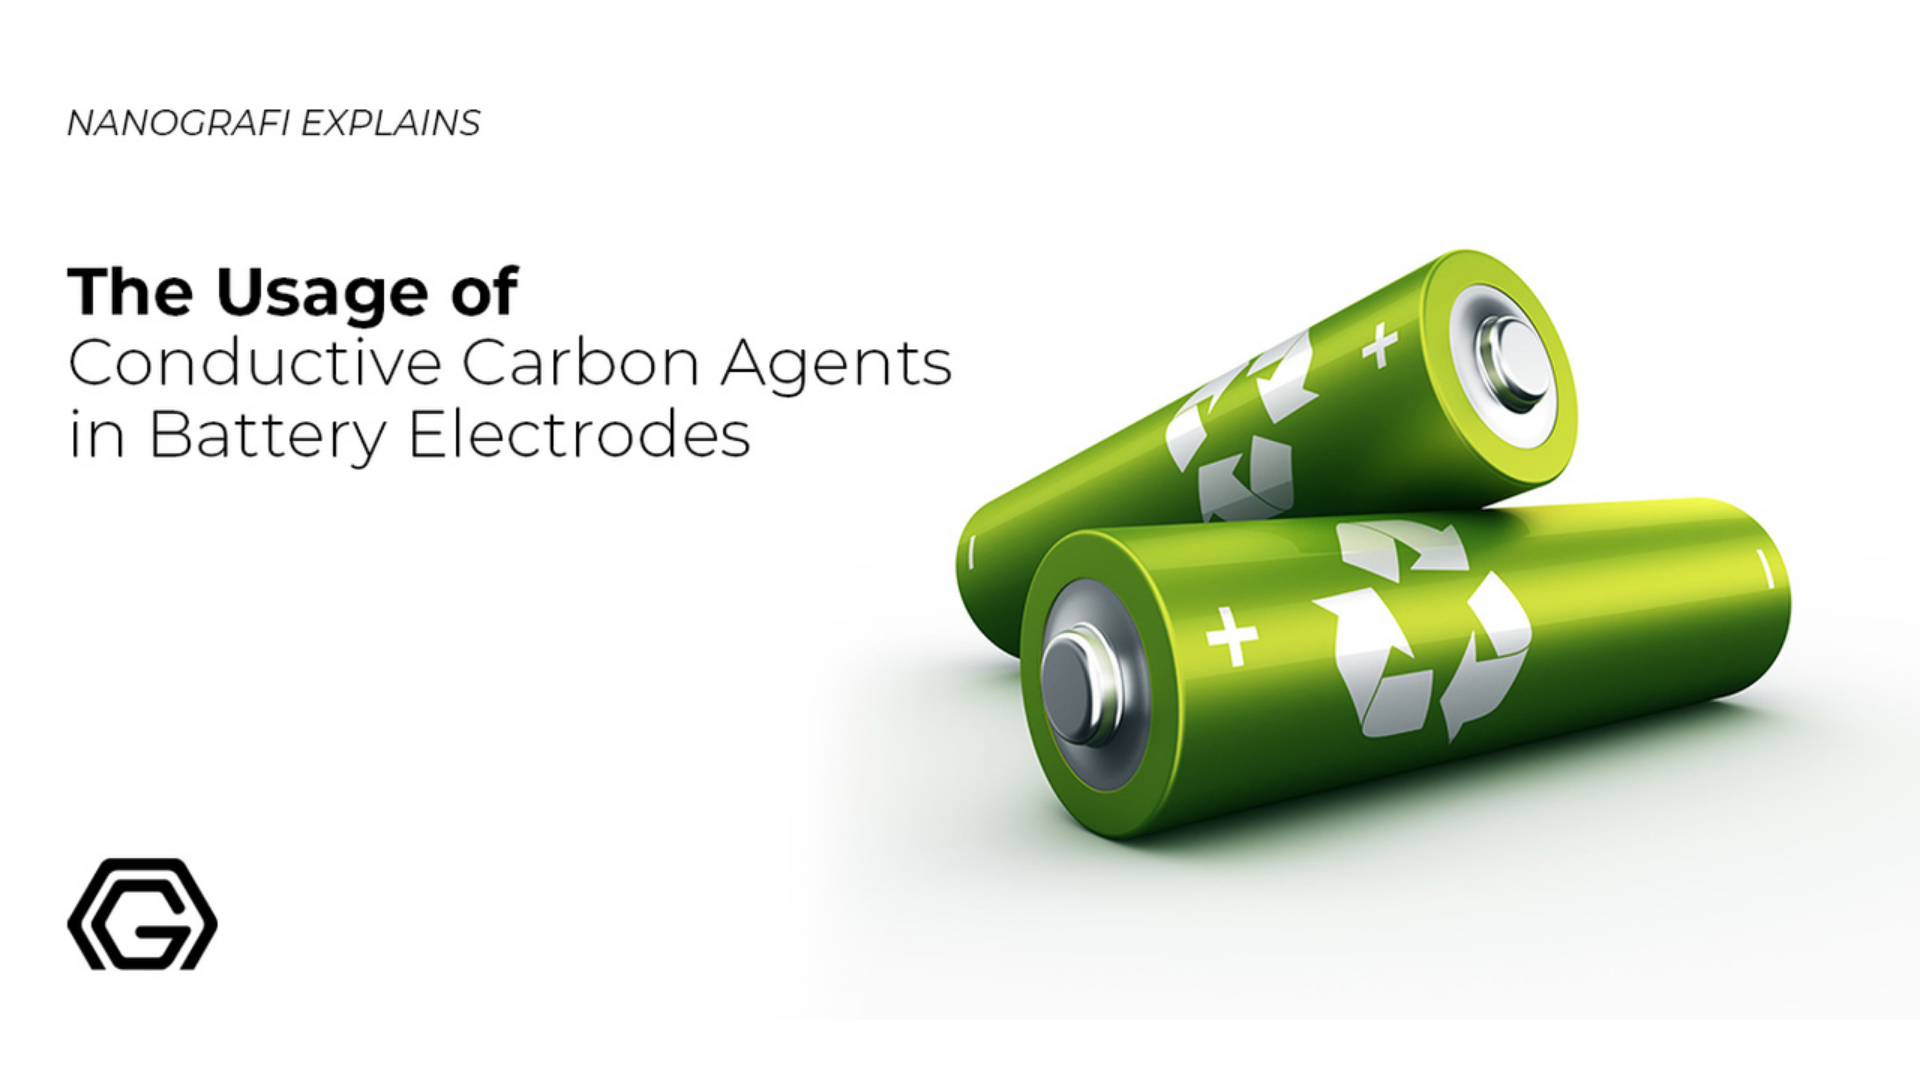 The usage of conductive carbon agents in battery electrodes